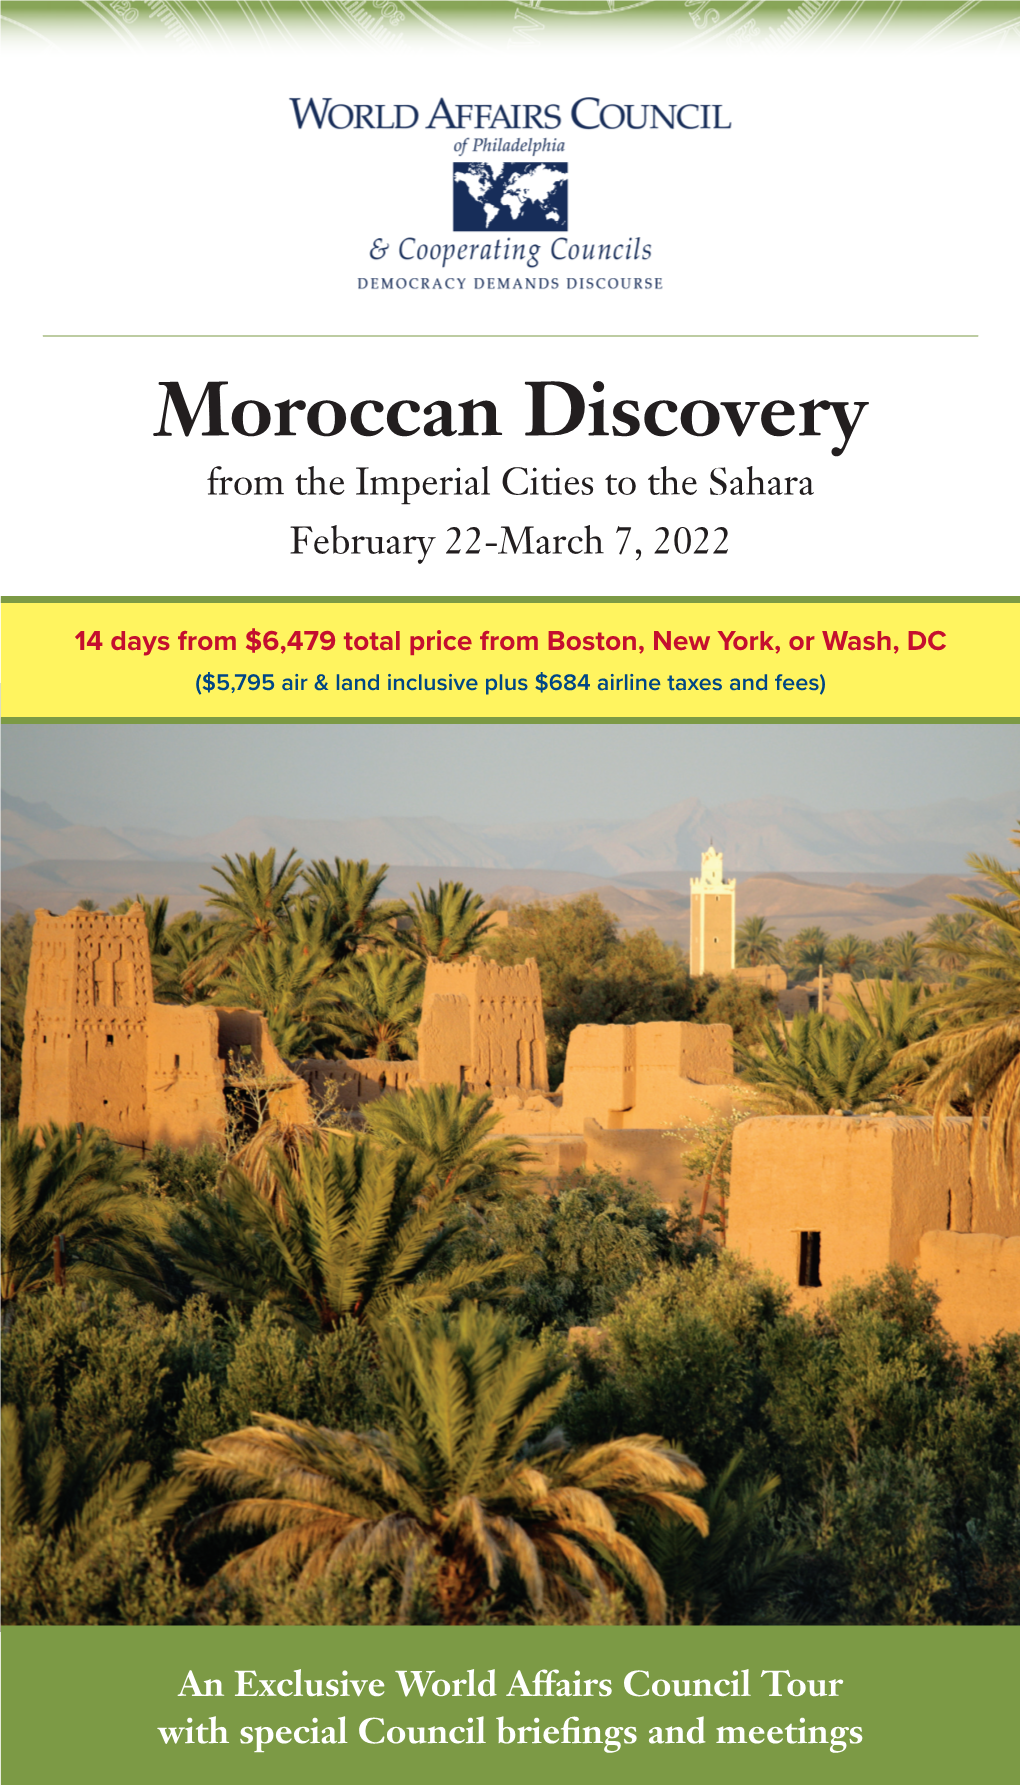 Moroccan Discovery from the Imperial Cities to the Sahara February 22-March 7, 2022